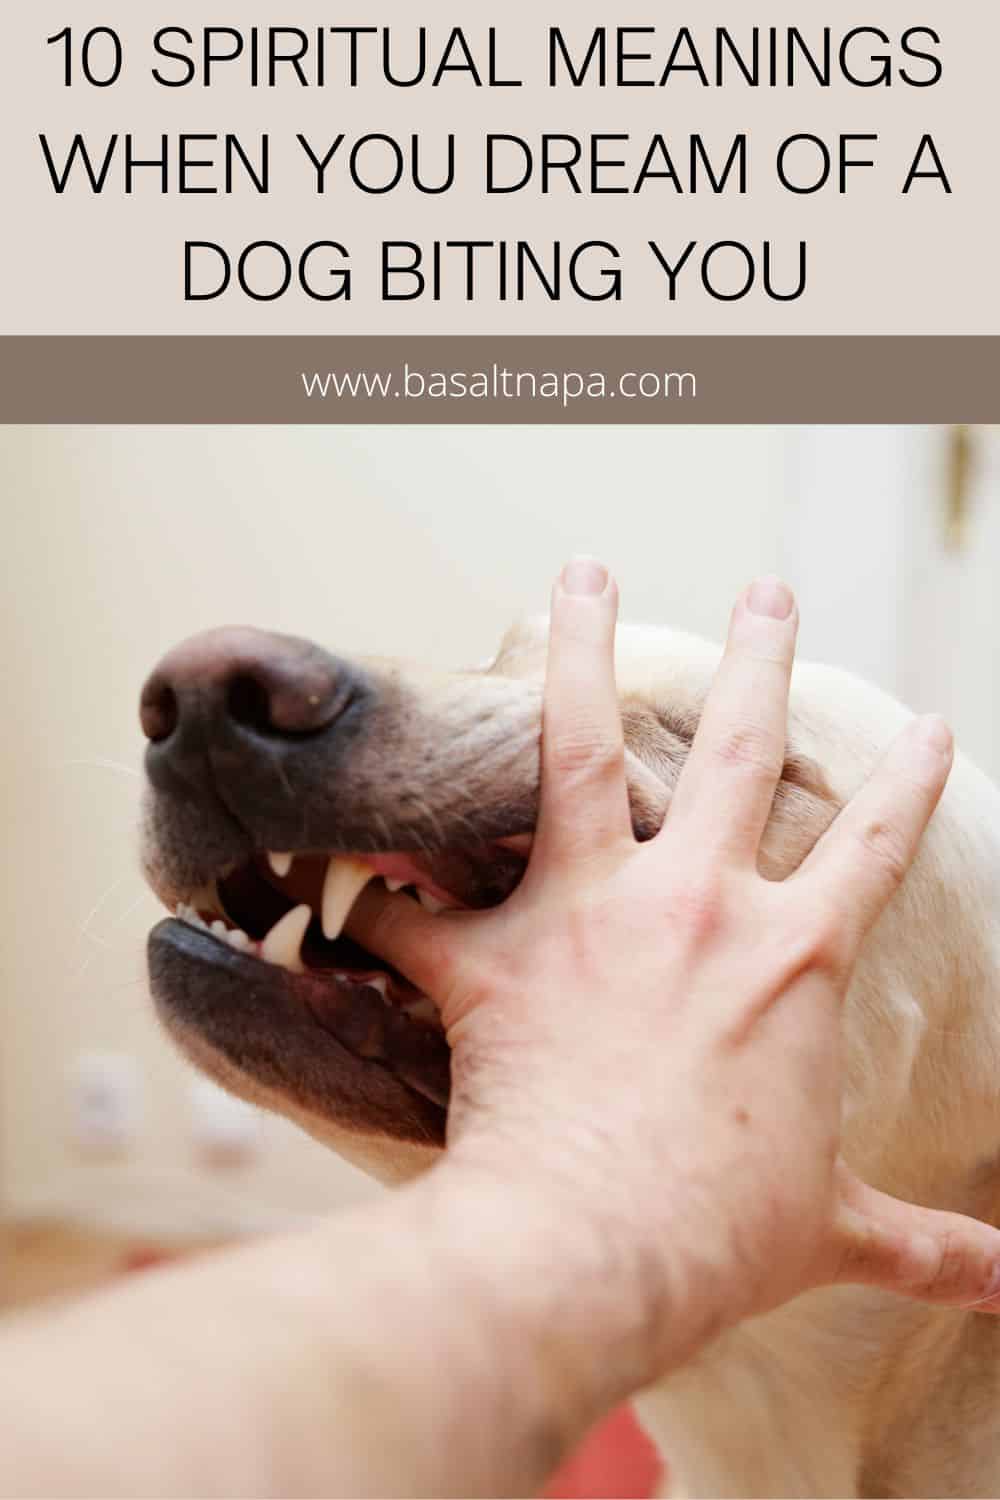 10 Spiritual Meanings When You Dream Of A Dog Biting You